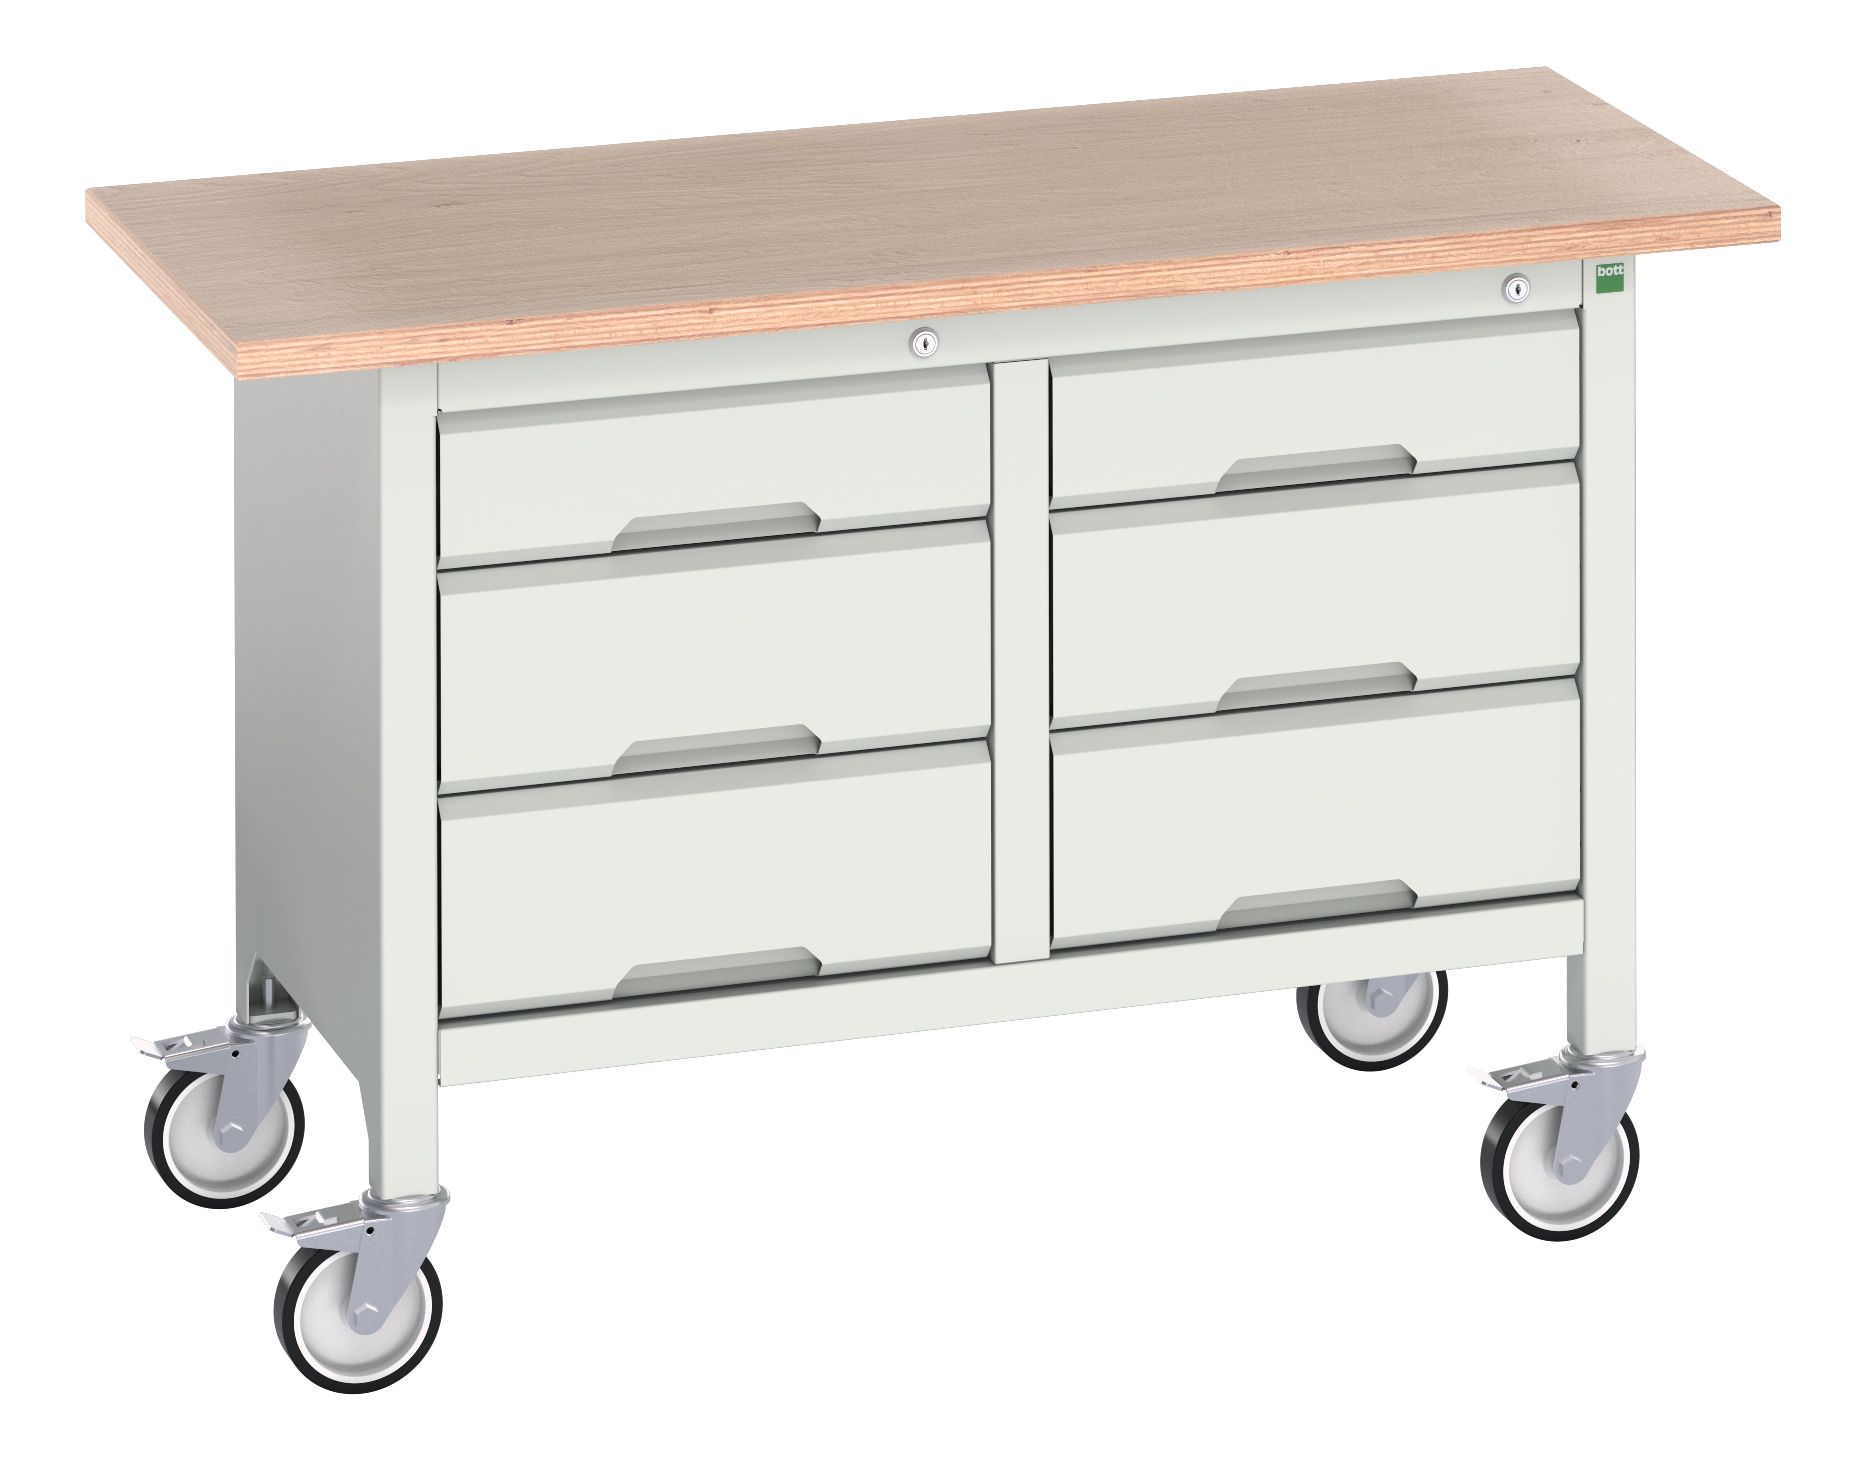 Bott Verso Mobile Storage Bench With 3 Drawer Cabinet / 3 Drawer Cabinet - 16923204.16